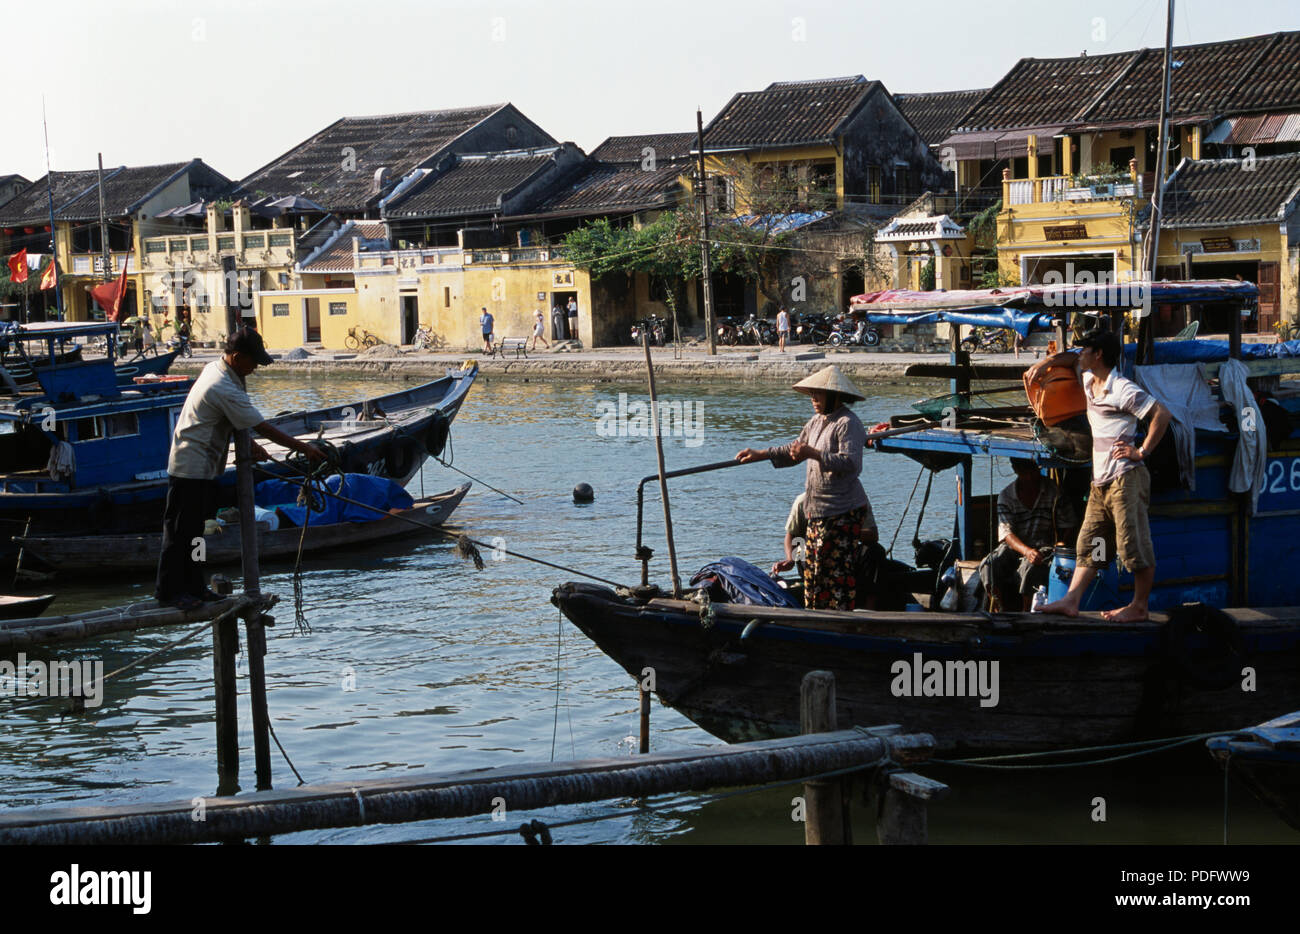 River life on the Thu Bhon river in Hoi An, Vietnam         FOR EDITORIAL USE ONLY Stock Photo